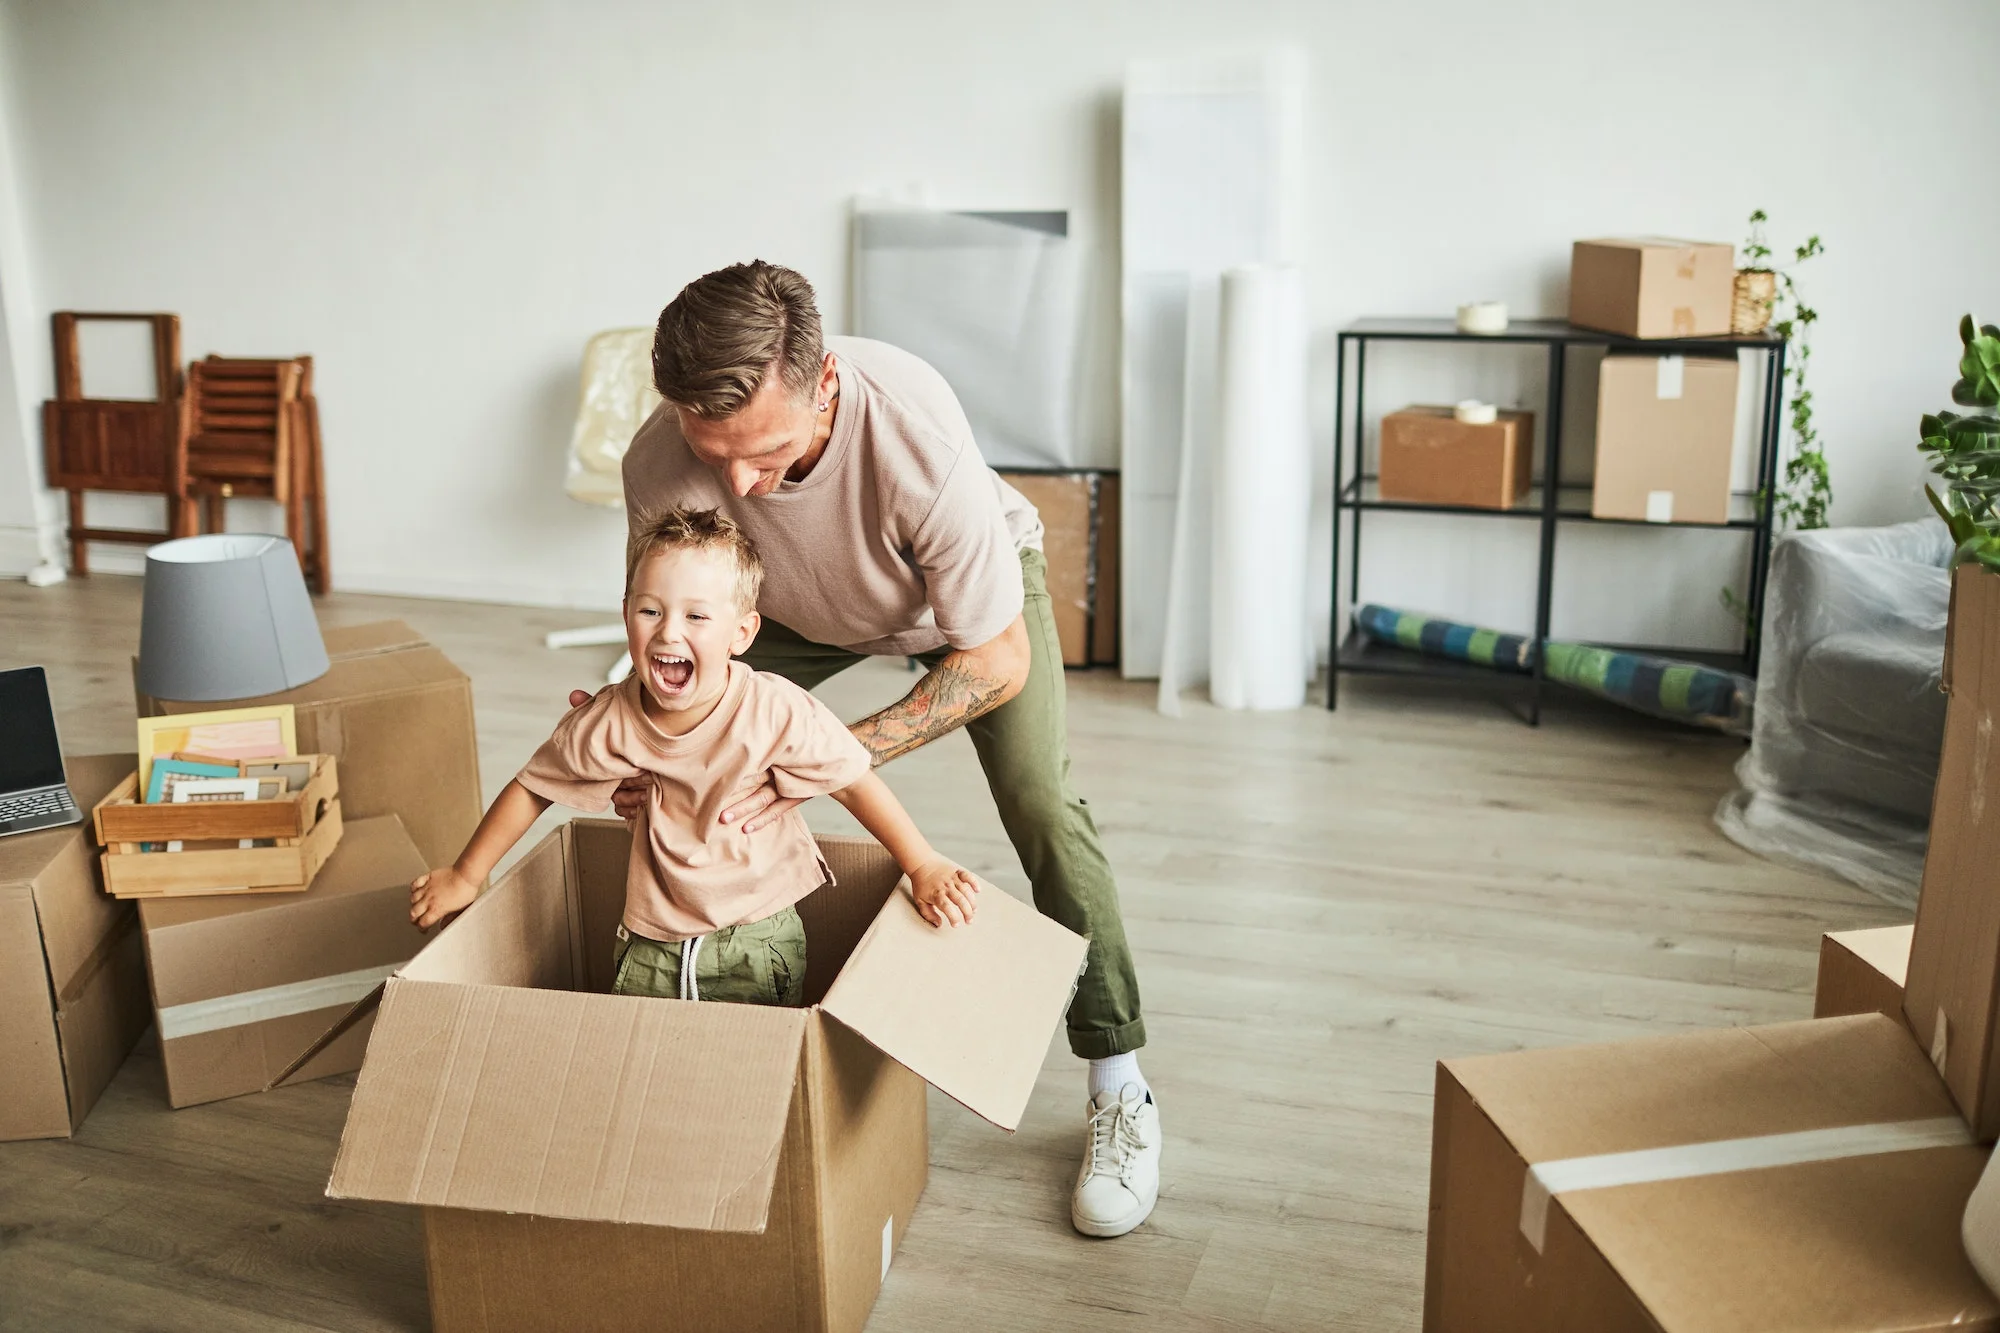 A man and his son are moving into a new home.